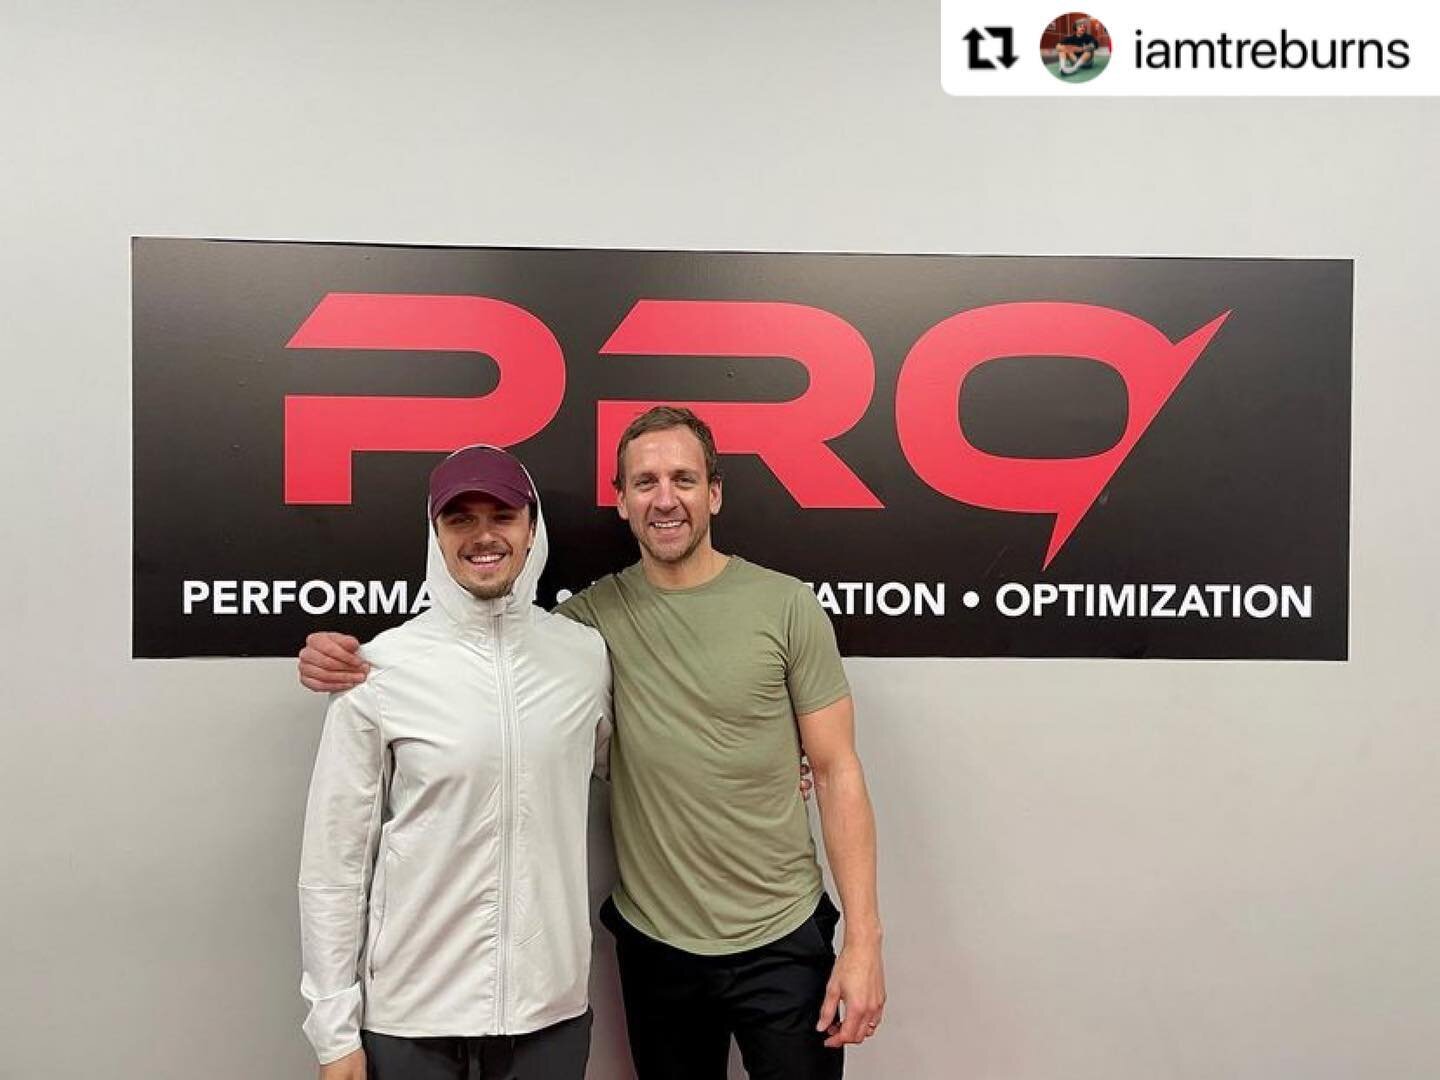 Wow @iamtreburns such kind words. This is why we do what we do
#Repost @iamtreburns with @use.repost
・・・
This is how Proactive Changed my life&hellip; ❤️&zwj;🩹 

I started coming to Proactive back in February of 2018 to see the Legendary @warrenheff